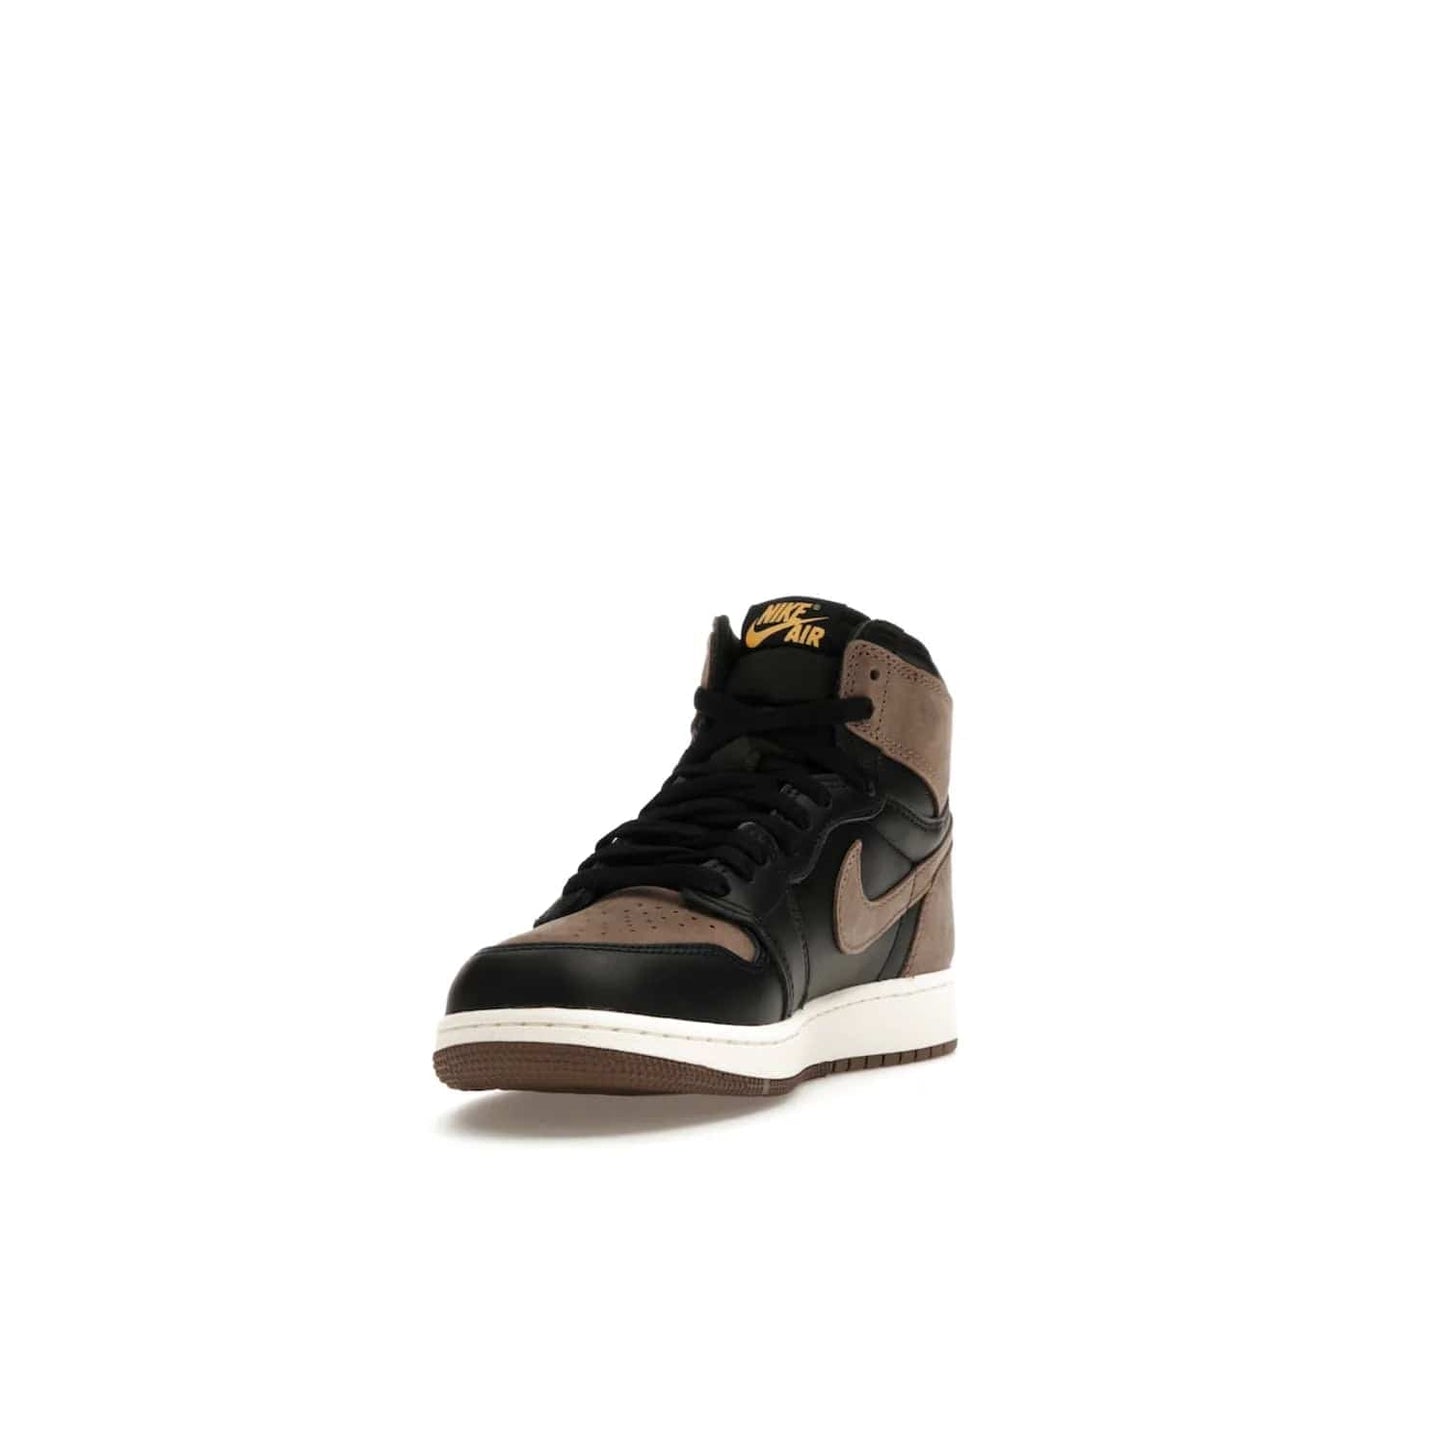 Jordan 1 Retro High OG Palomino (GS) - Image 13 - Only at www.BallersClubKickz.com - Introducing the luxurious Jordan 1 Retro High OG Palomino (GS). Featuring black leather with metallic gold and palomino accents, this sneaker is perfect for any occasion. Grab yours when they release on September 2nd of 2023.